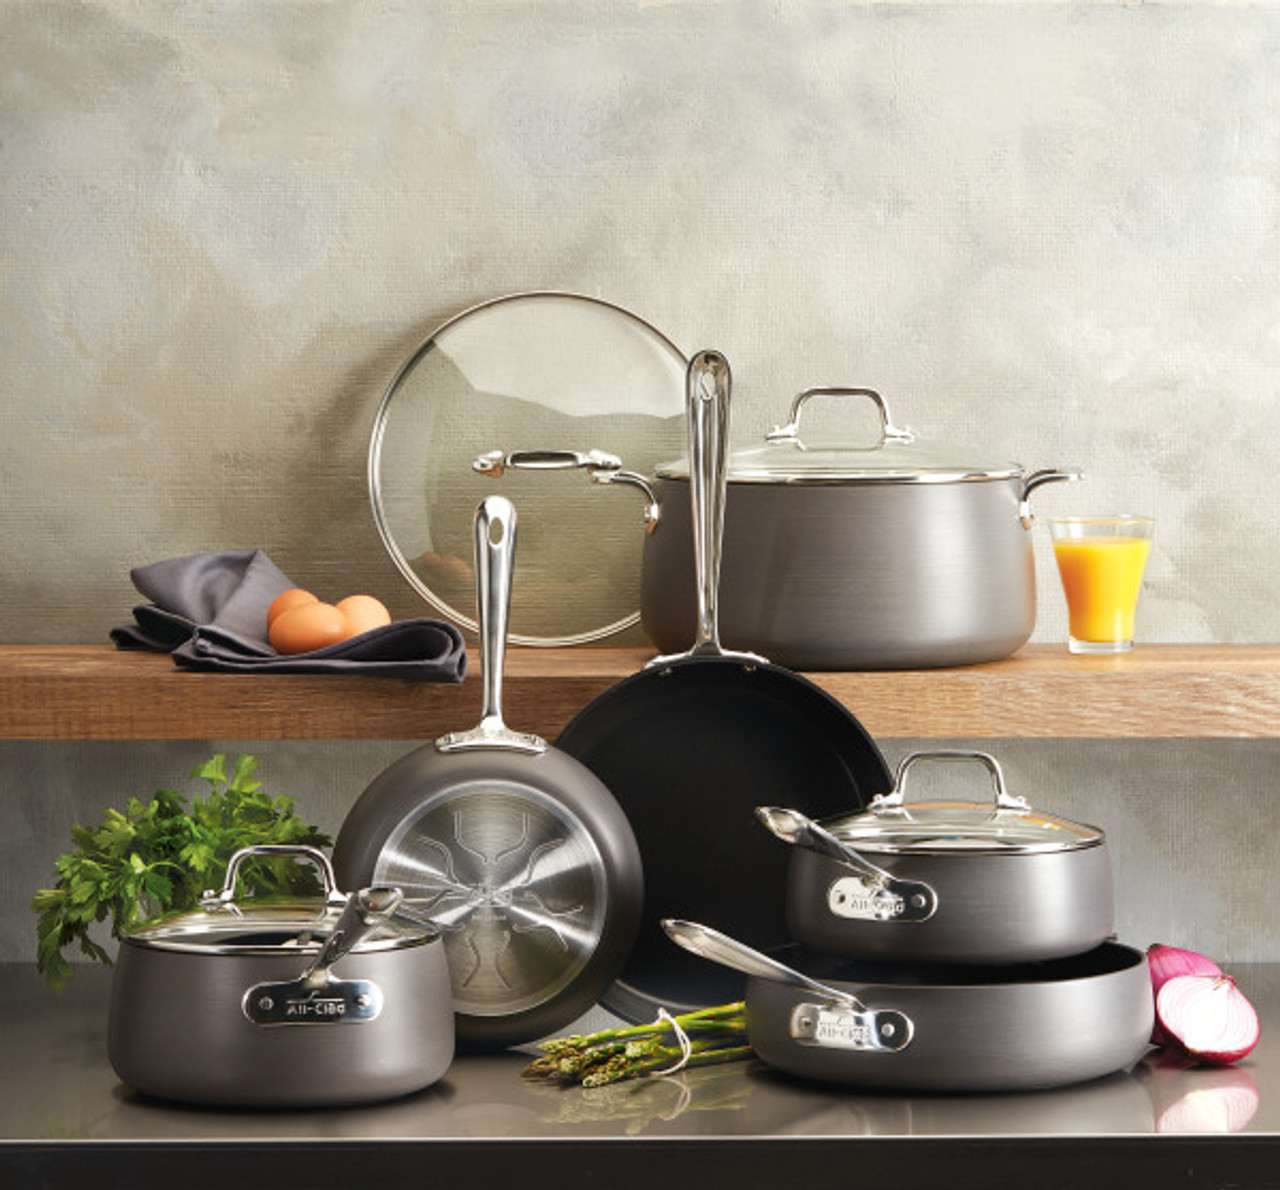 All-Clad d3 Stainless Steel Non-Stick 10-Piece Cookware Set with